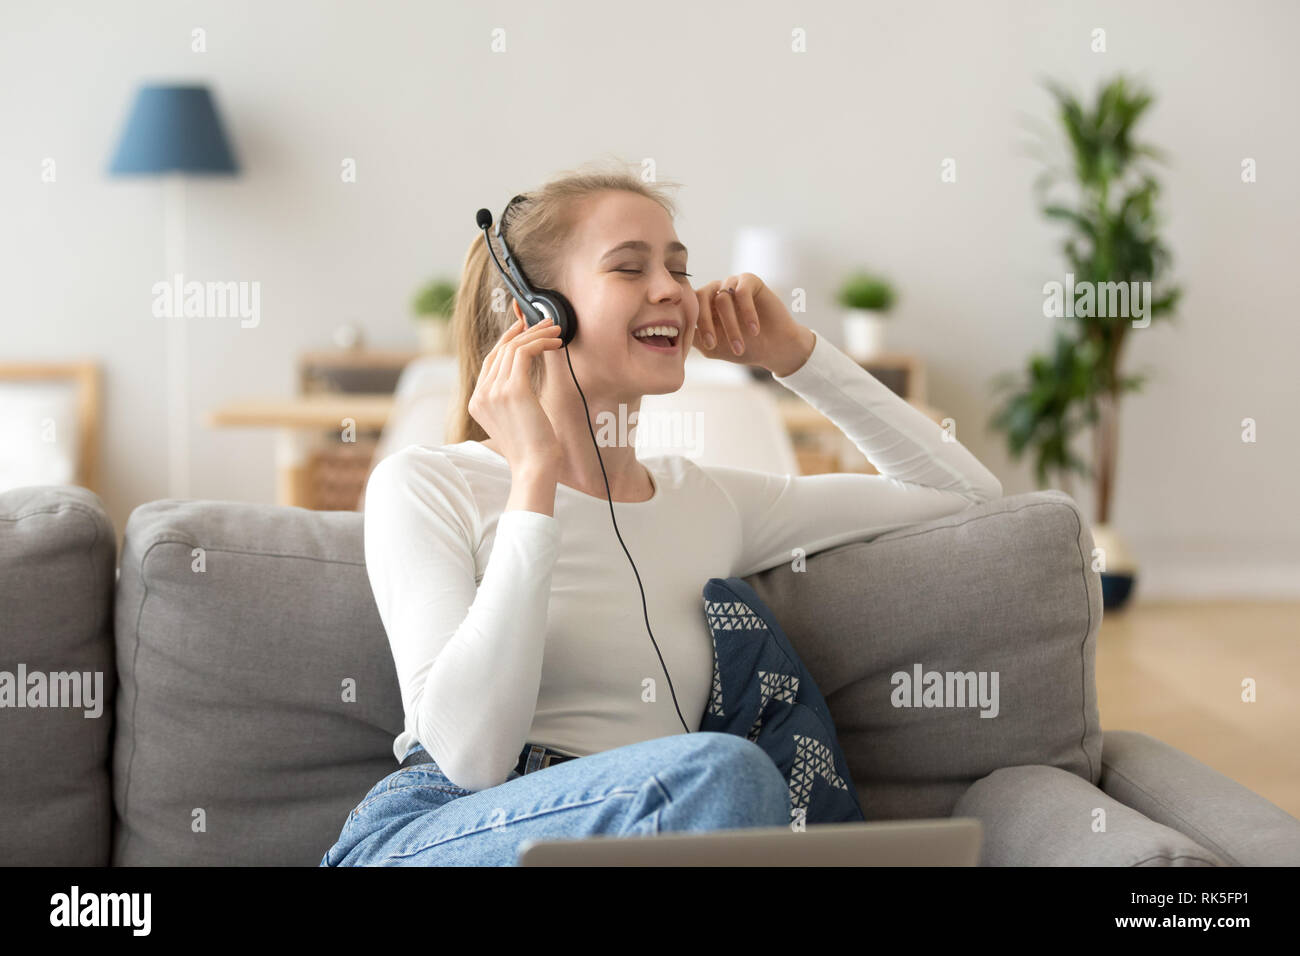 Relaxed smiling woman in headphones enjoying good music at home Stock Photo